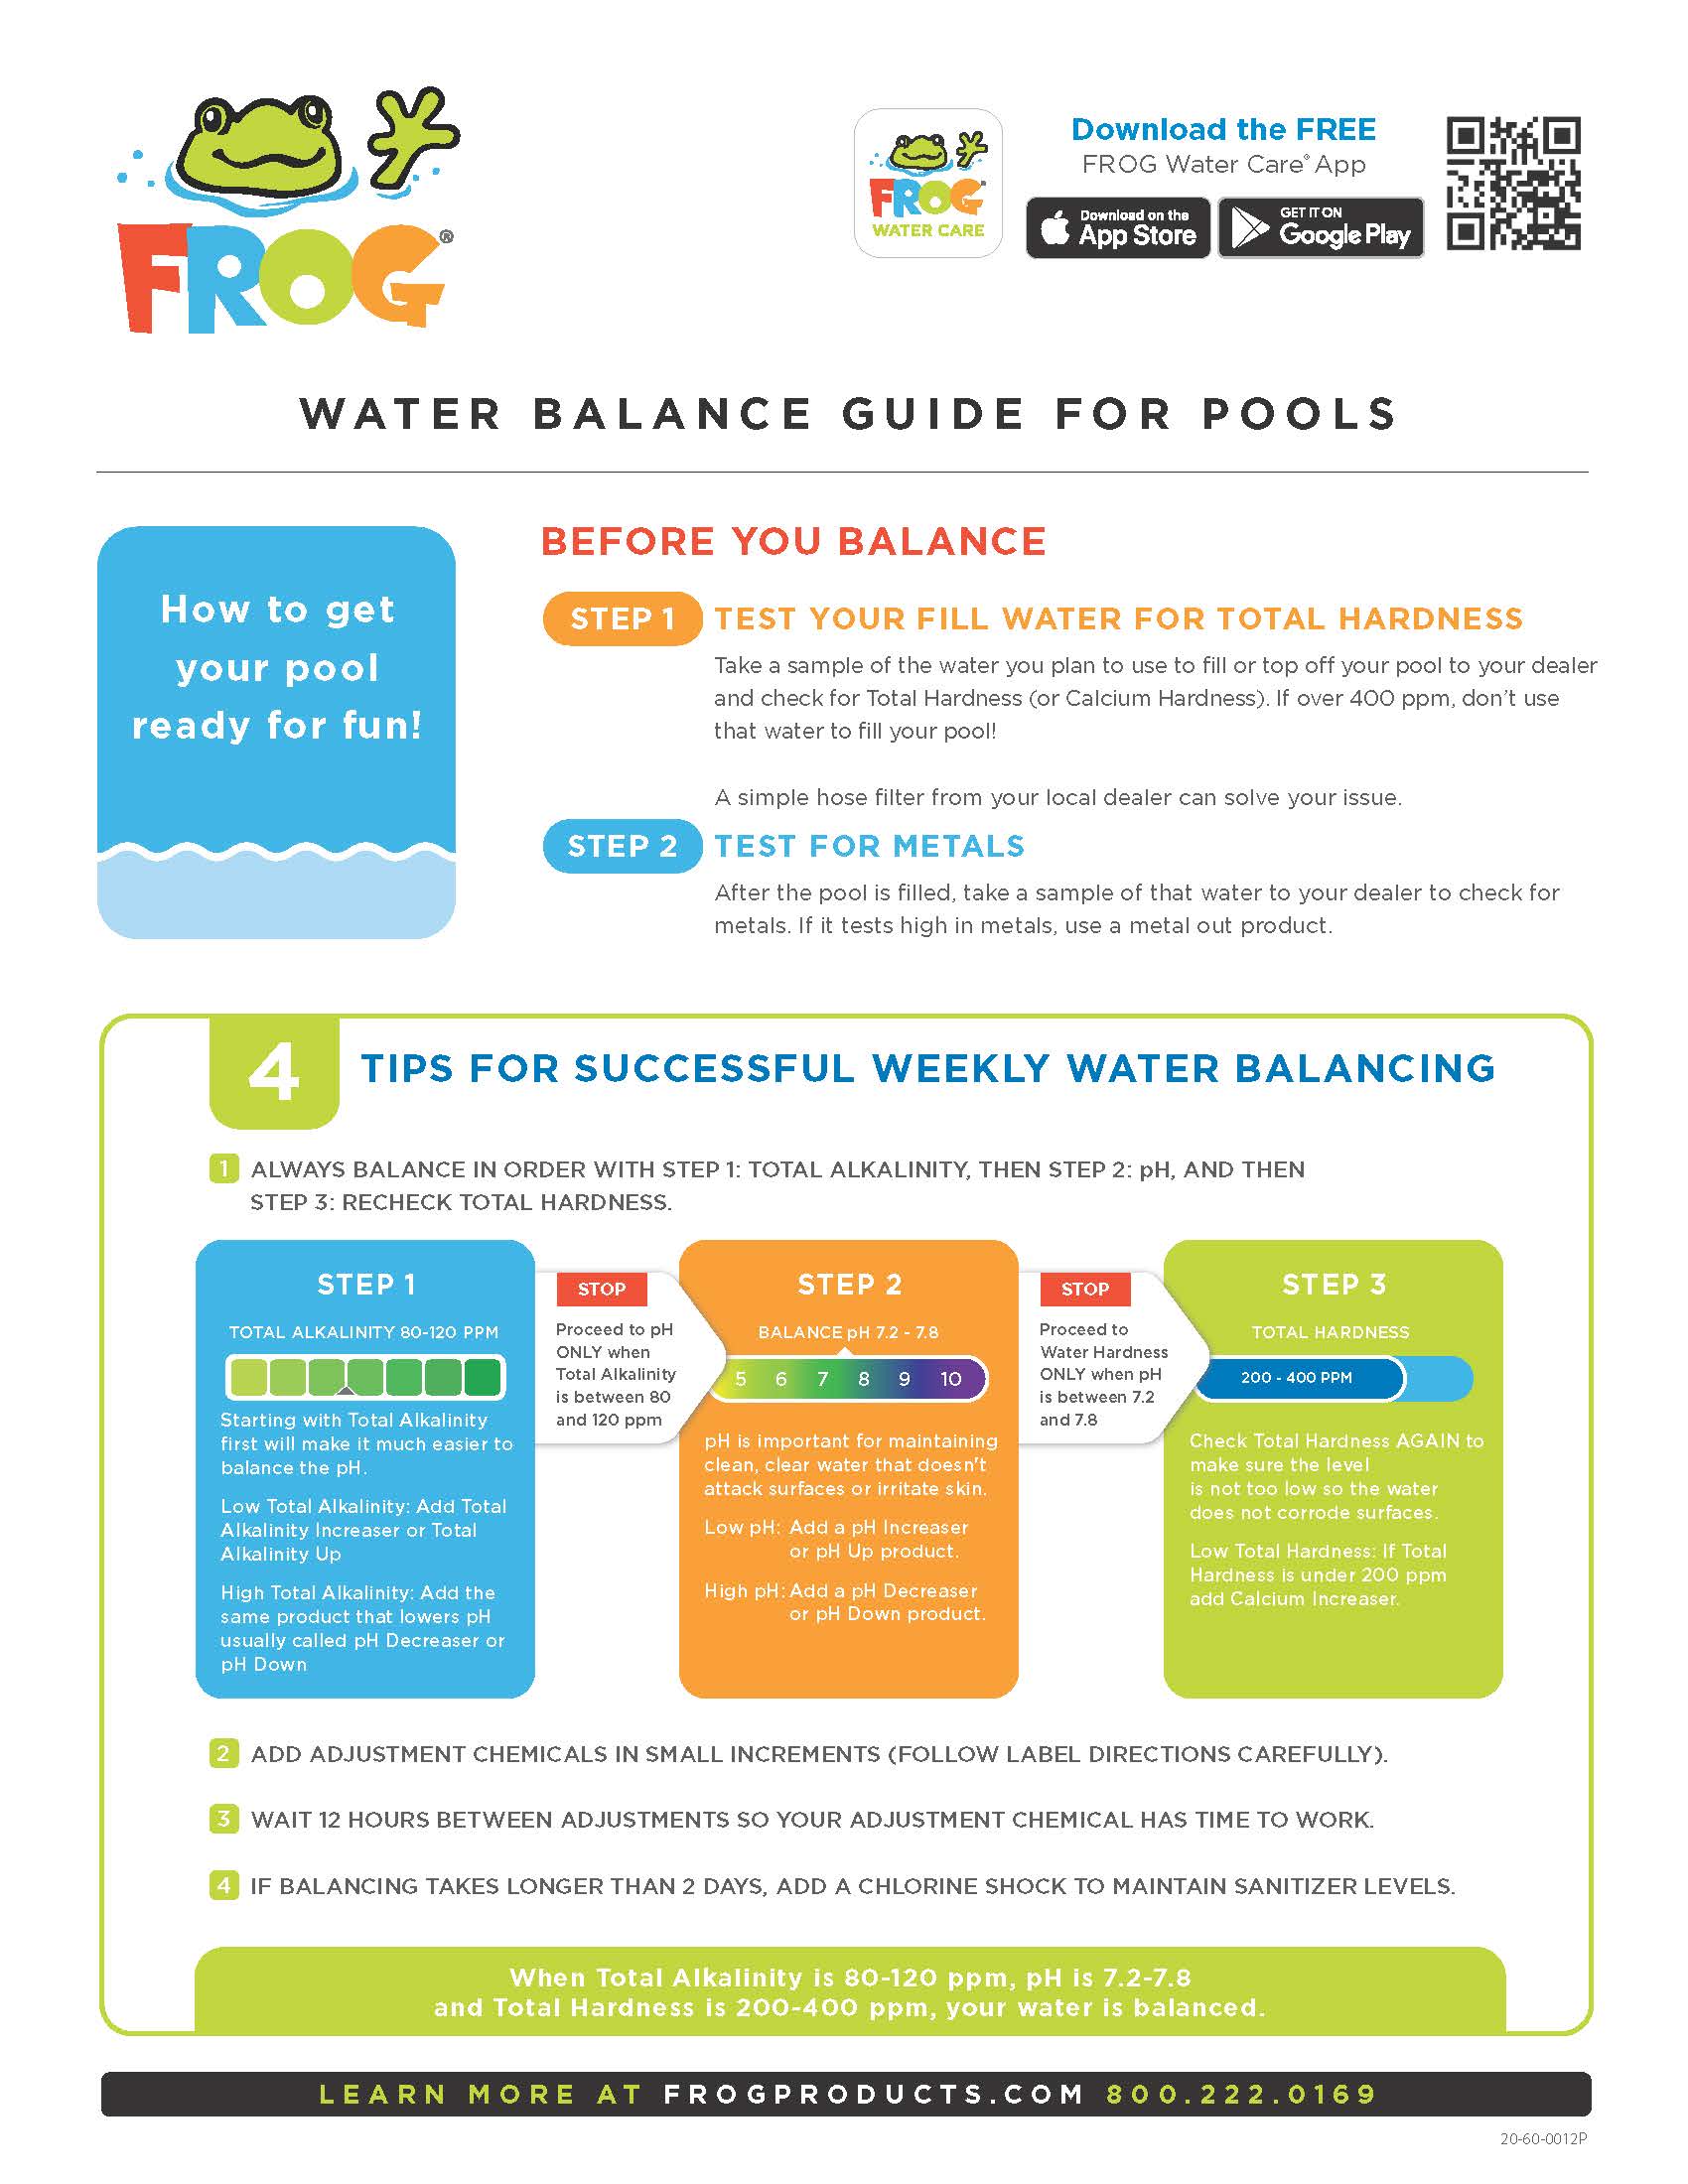 Water Balancing Guide for Hot Tubs or Swim Spas